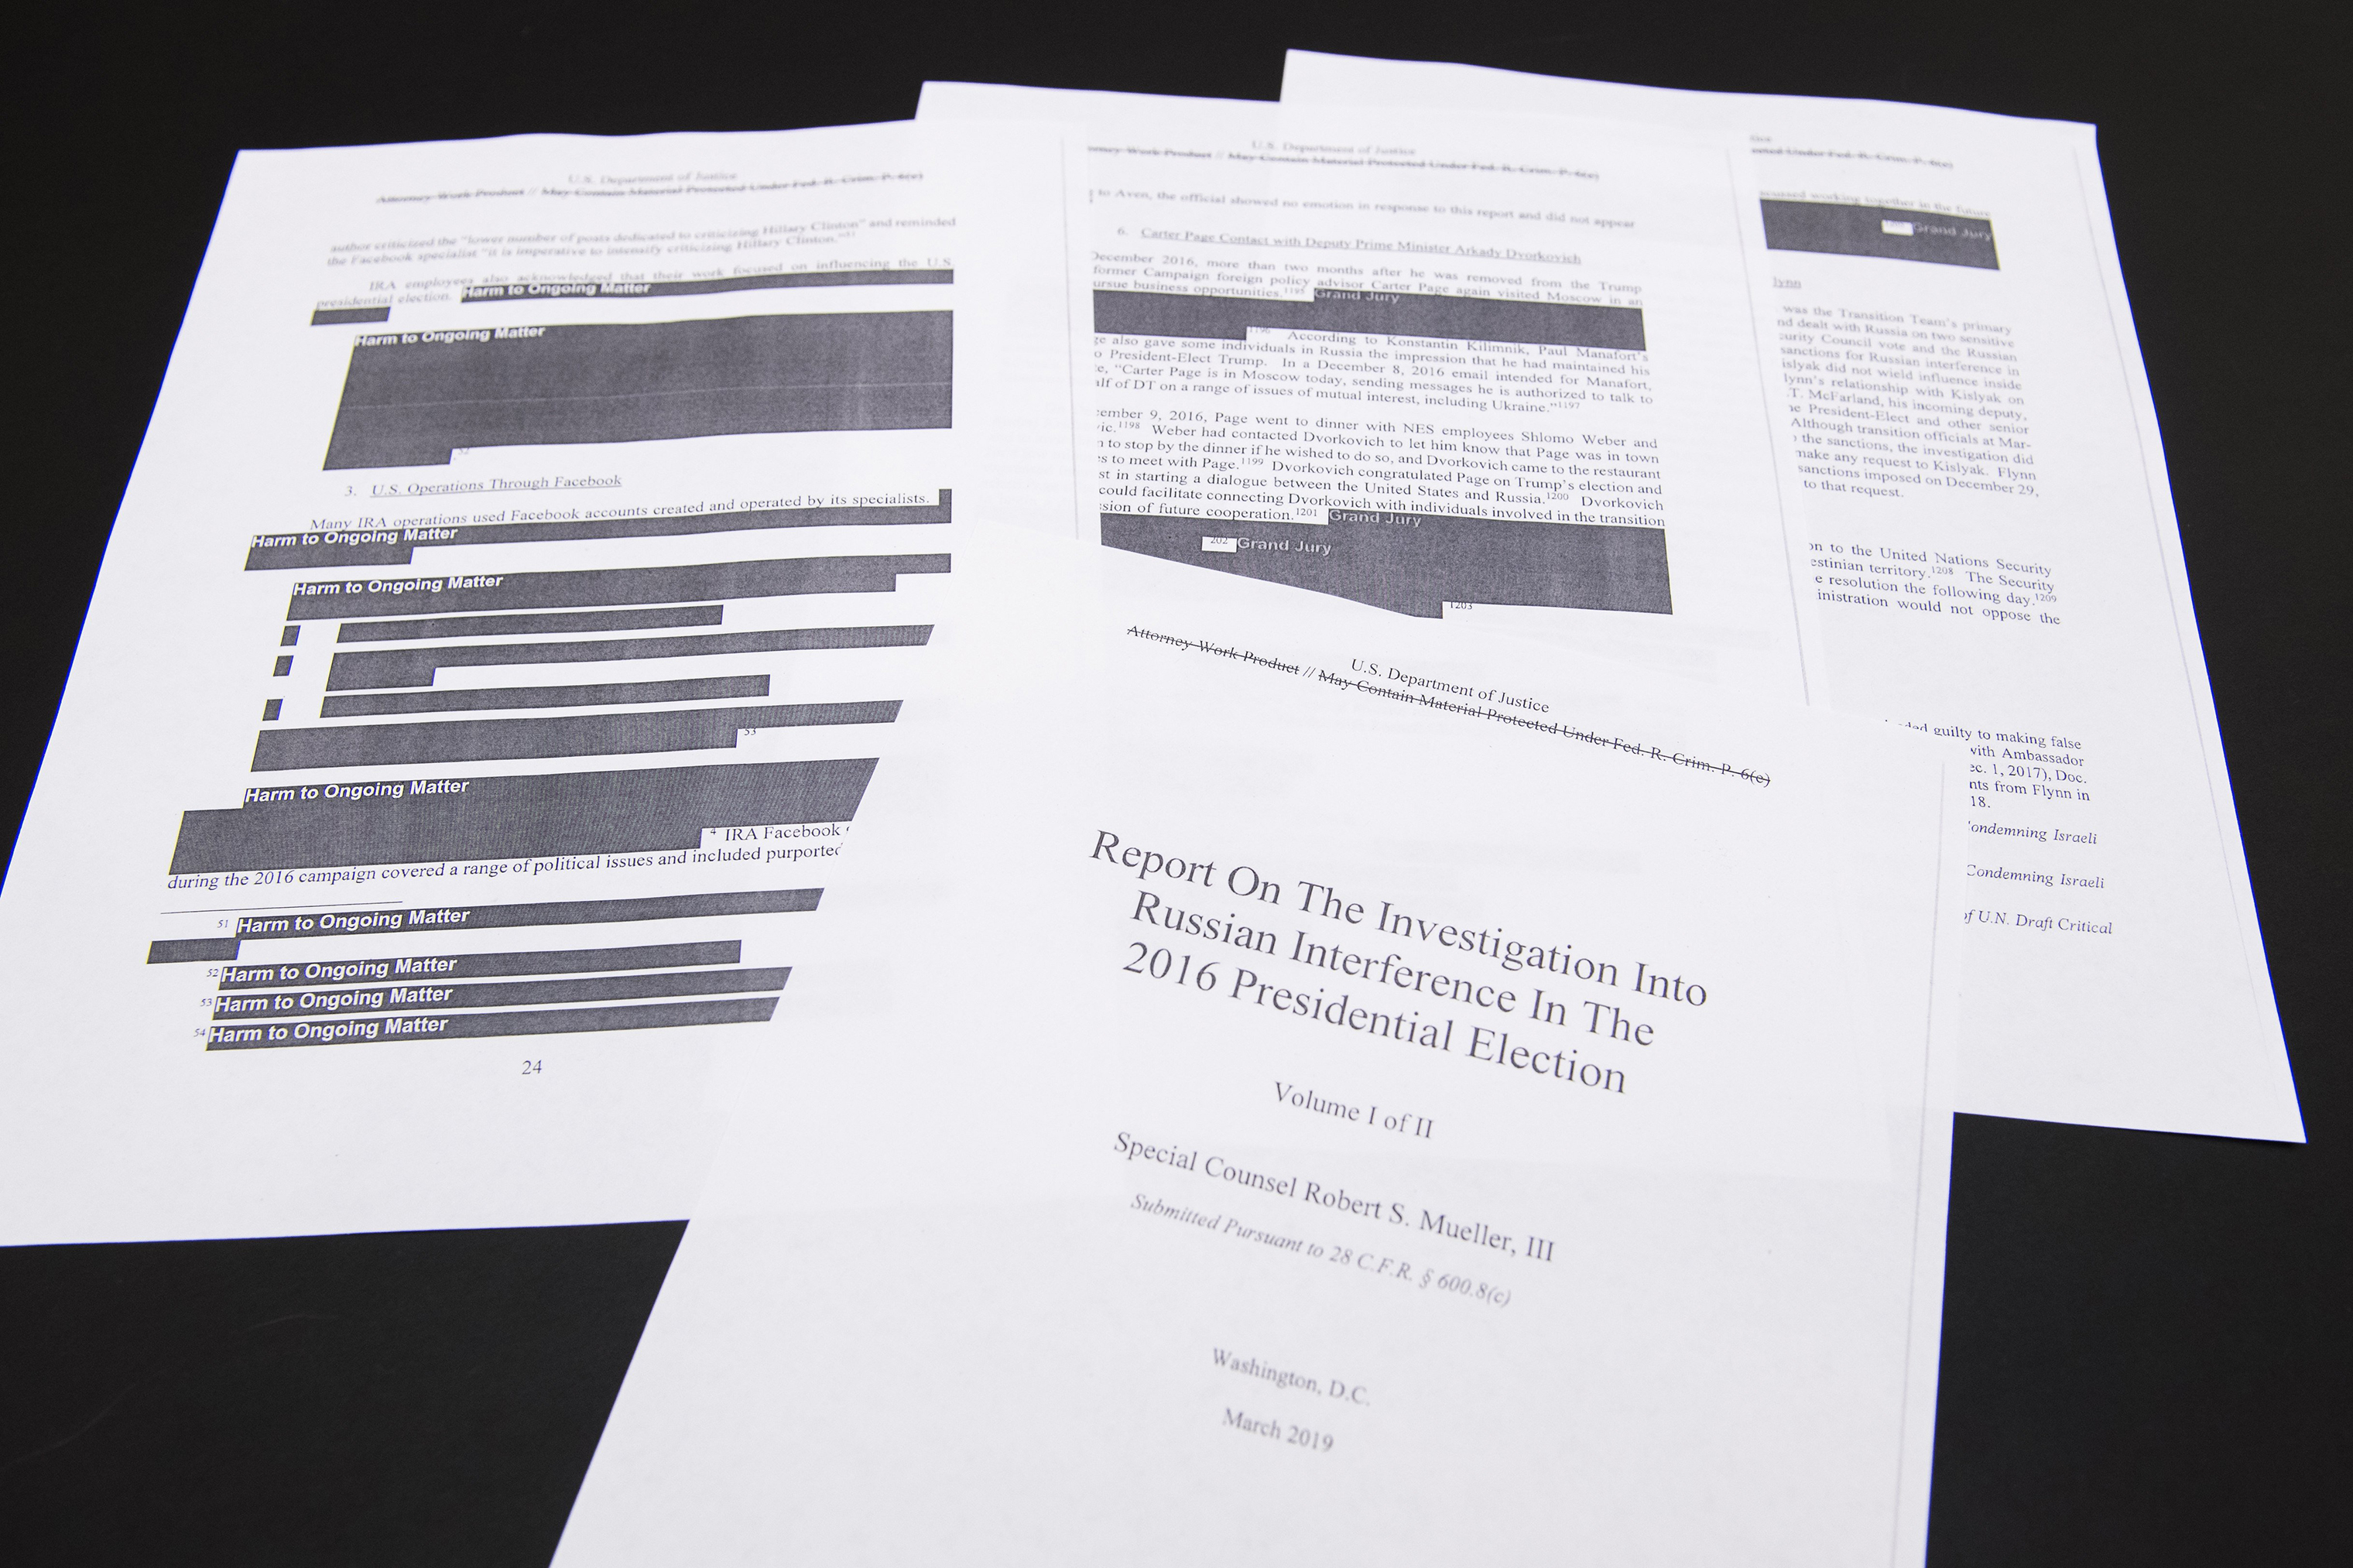 A few pages of special counsel Robert Mueller's report on Russian interference in the 2016 election. (Tom Williams—Newscom via ZUMA Press)